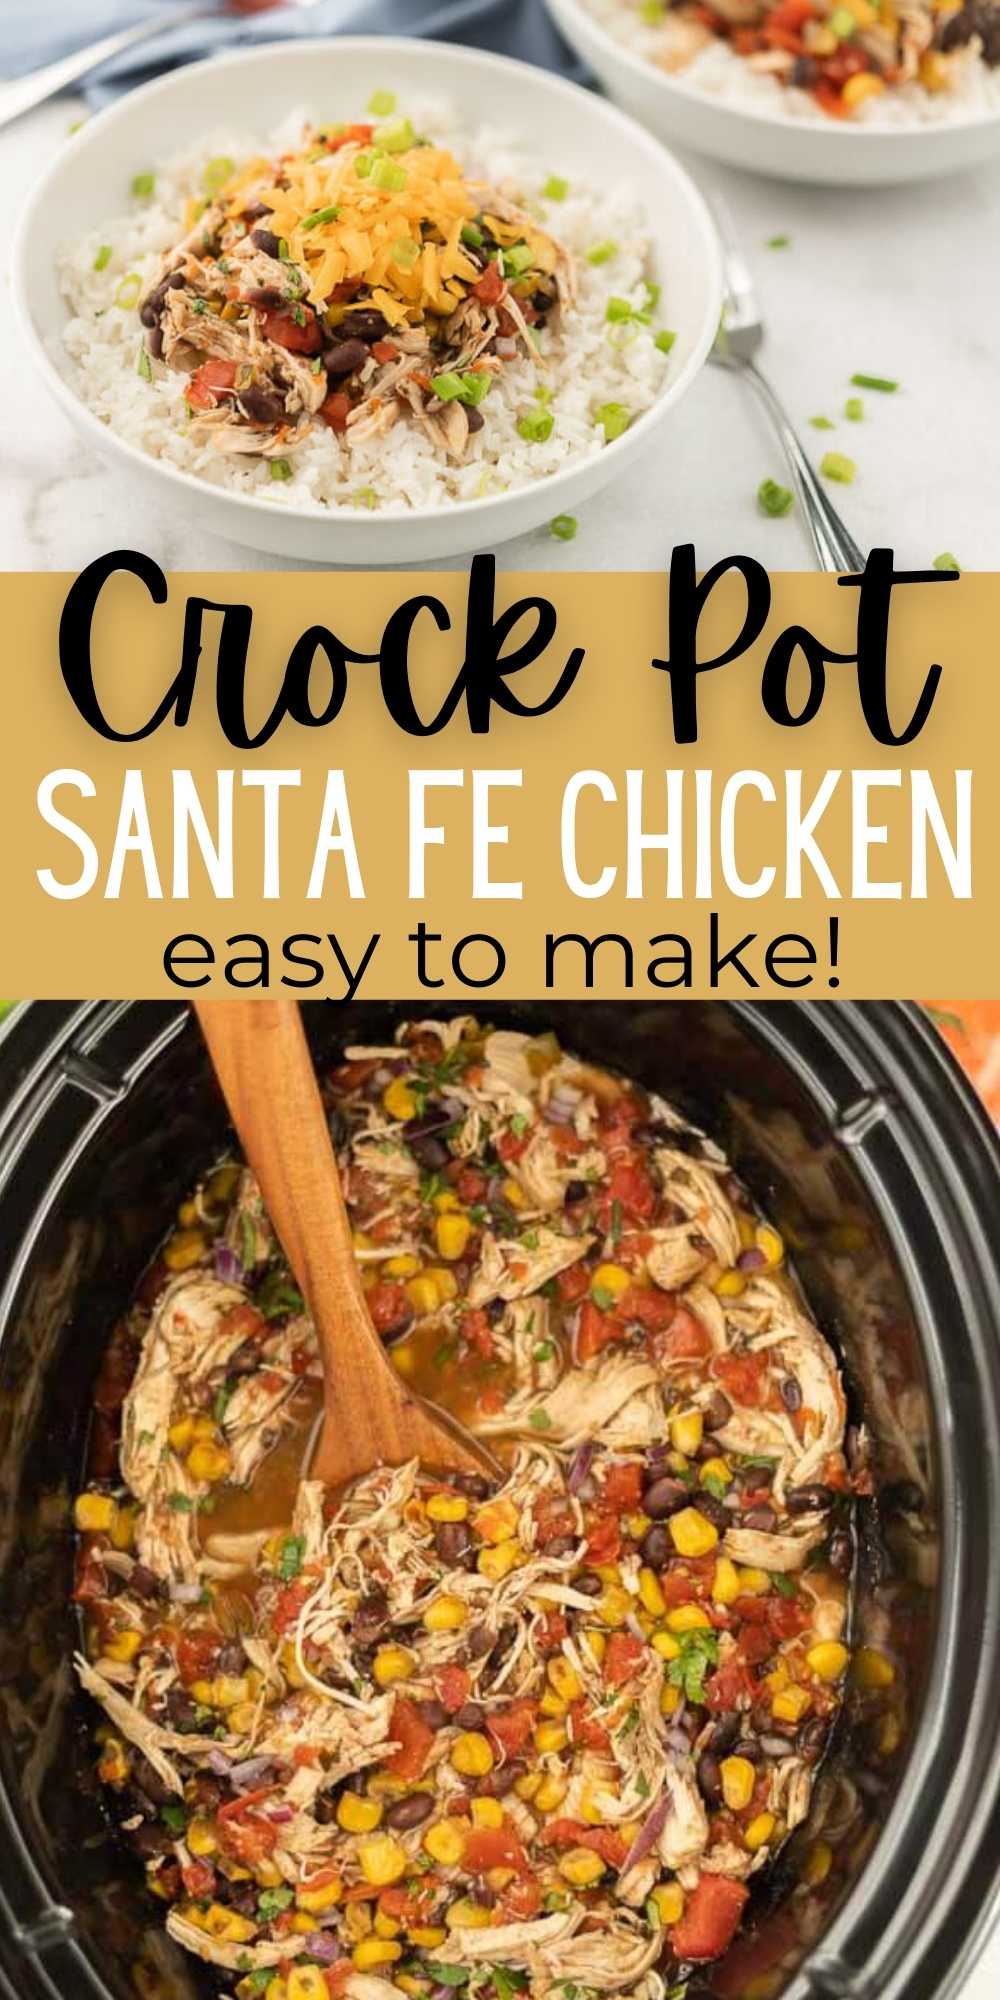 Dinner is a breeze when you make Crock Pot Santa Fe Chicken Recipe. Loaded with chicken, beans and more, this recipe is simple to make. You will love this easy, healthy slow cooker Santa Fe chicken recipe.  #eatingonadime #crockpotrecipes #slowcookerrecipes #chickenrecipes #healthyrecipes 
